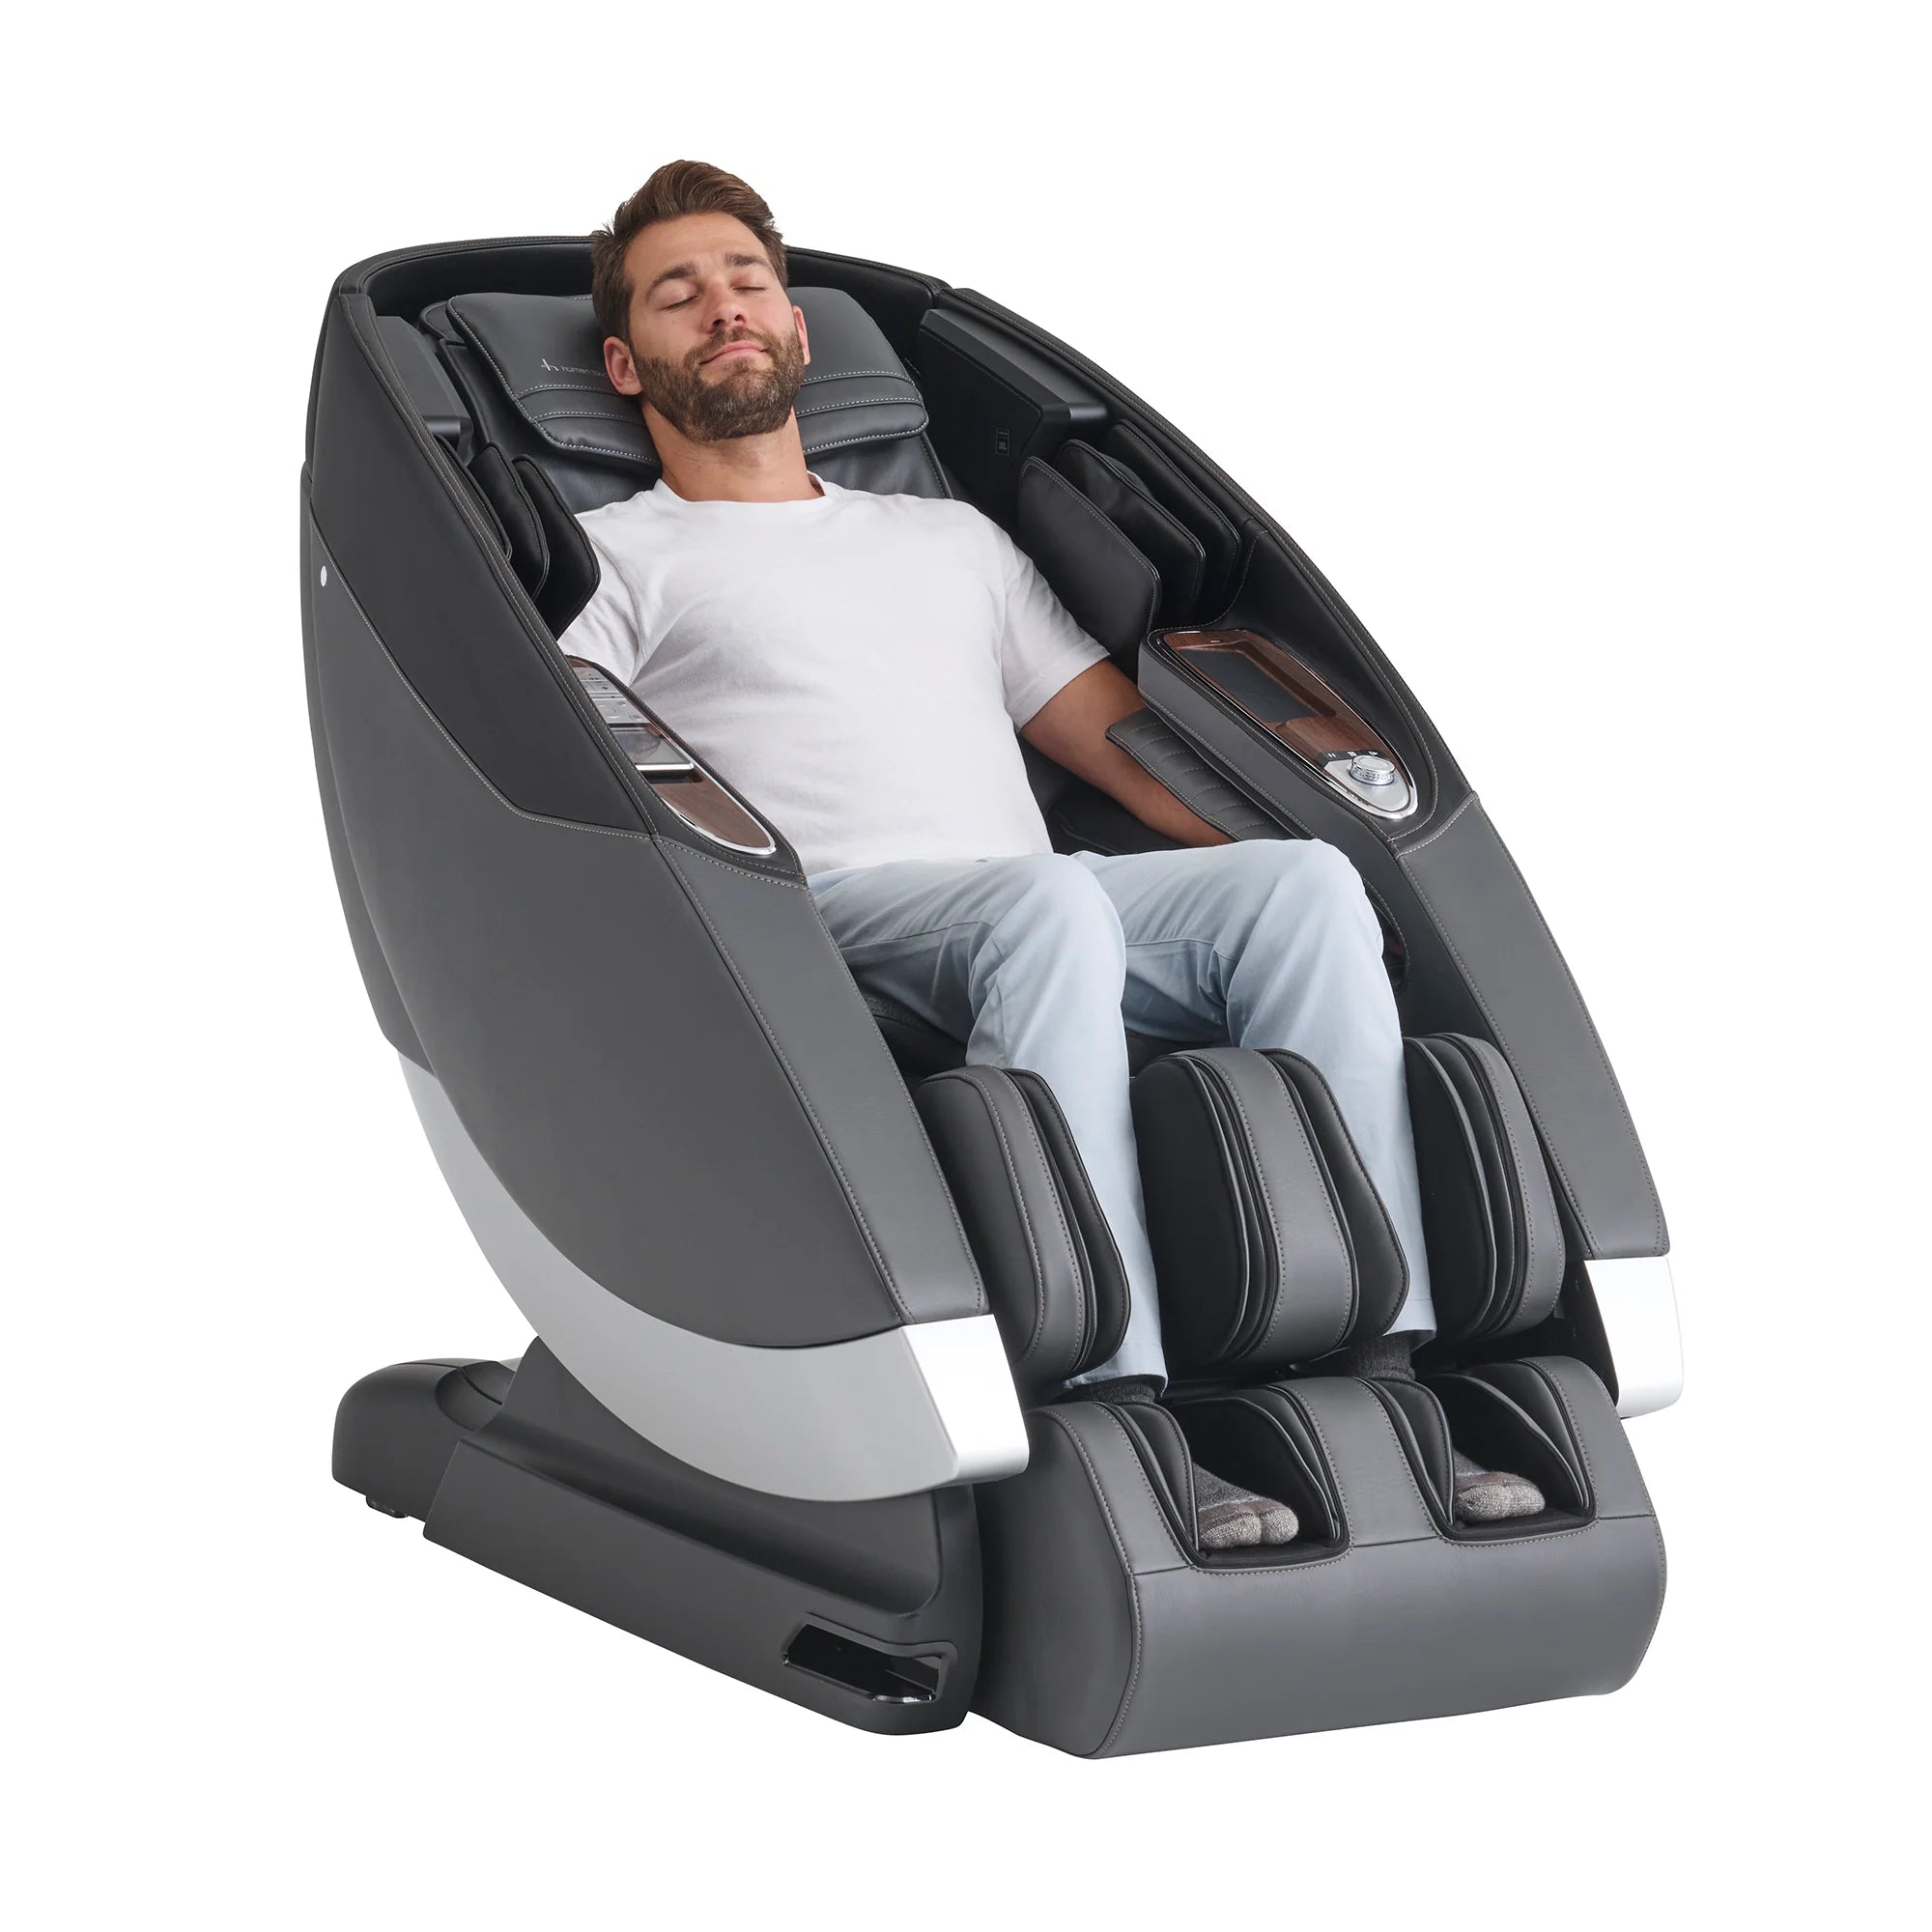 Human TouchMassage ChairsHuman Touch Super Novo 2.0 Massage ChairEspressoMassage Chair Heaven